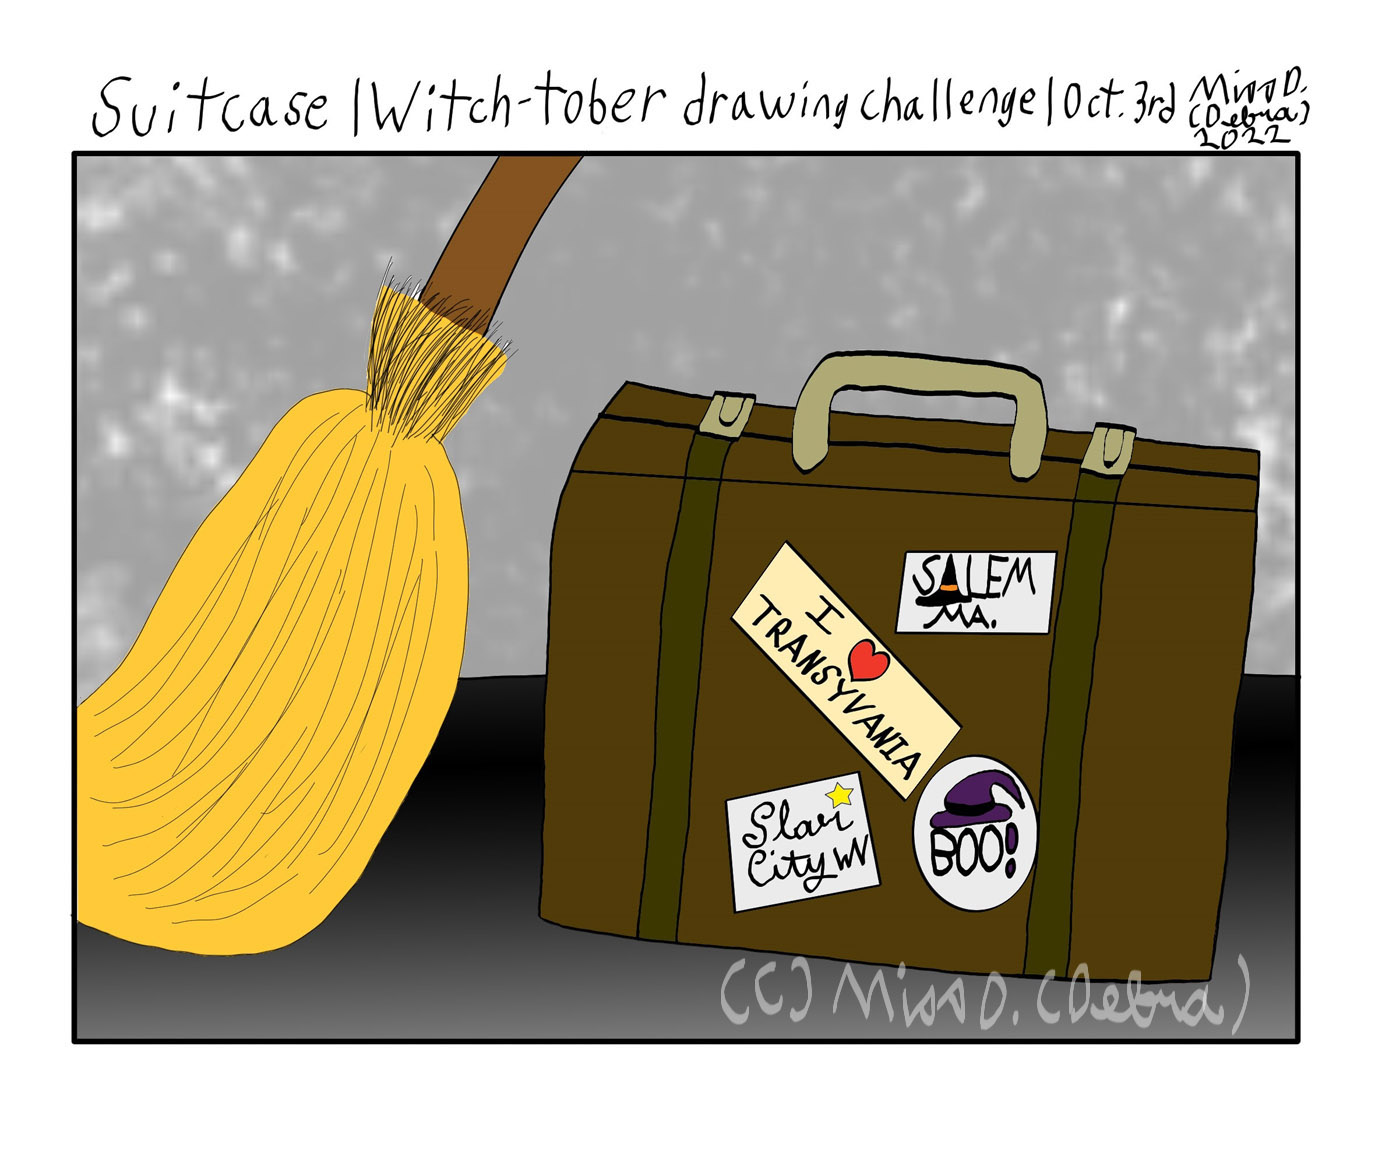 SUITCASE - Witch-Tober Drawing Challenge - Oct. 3rd